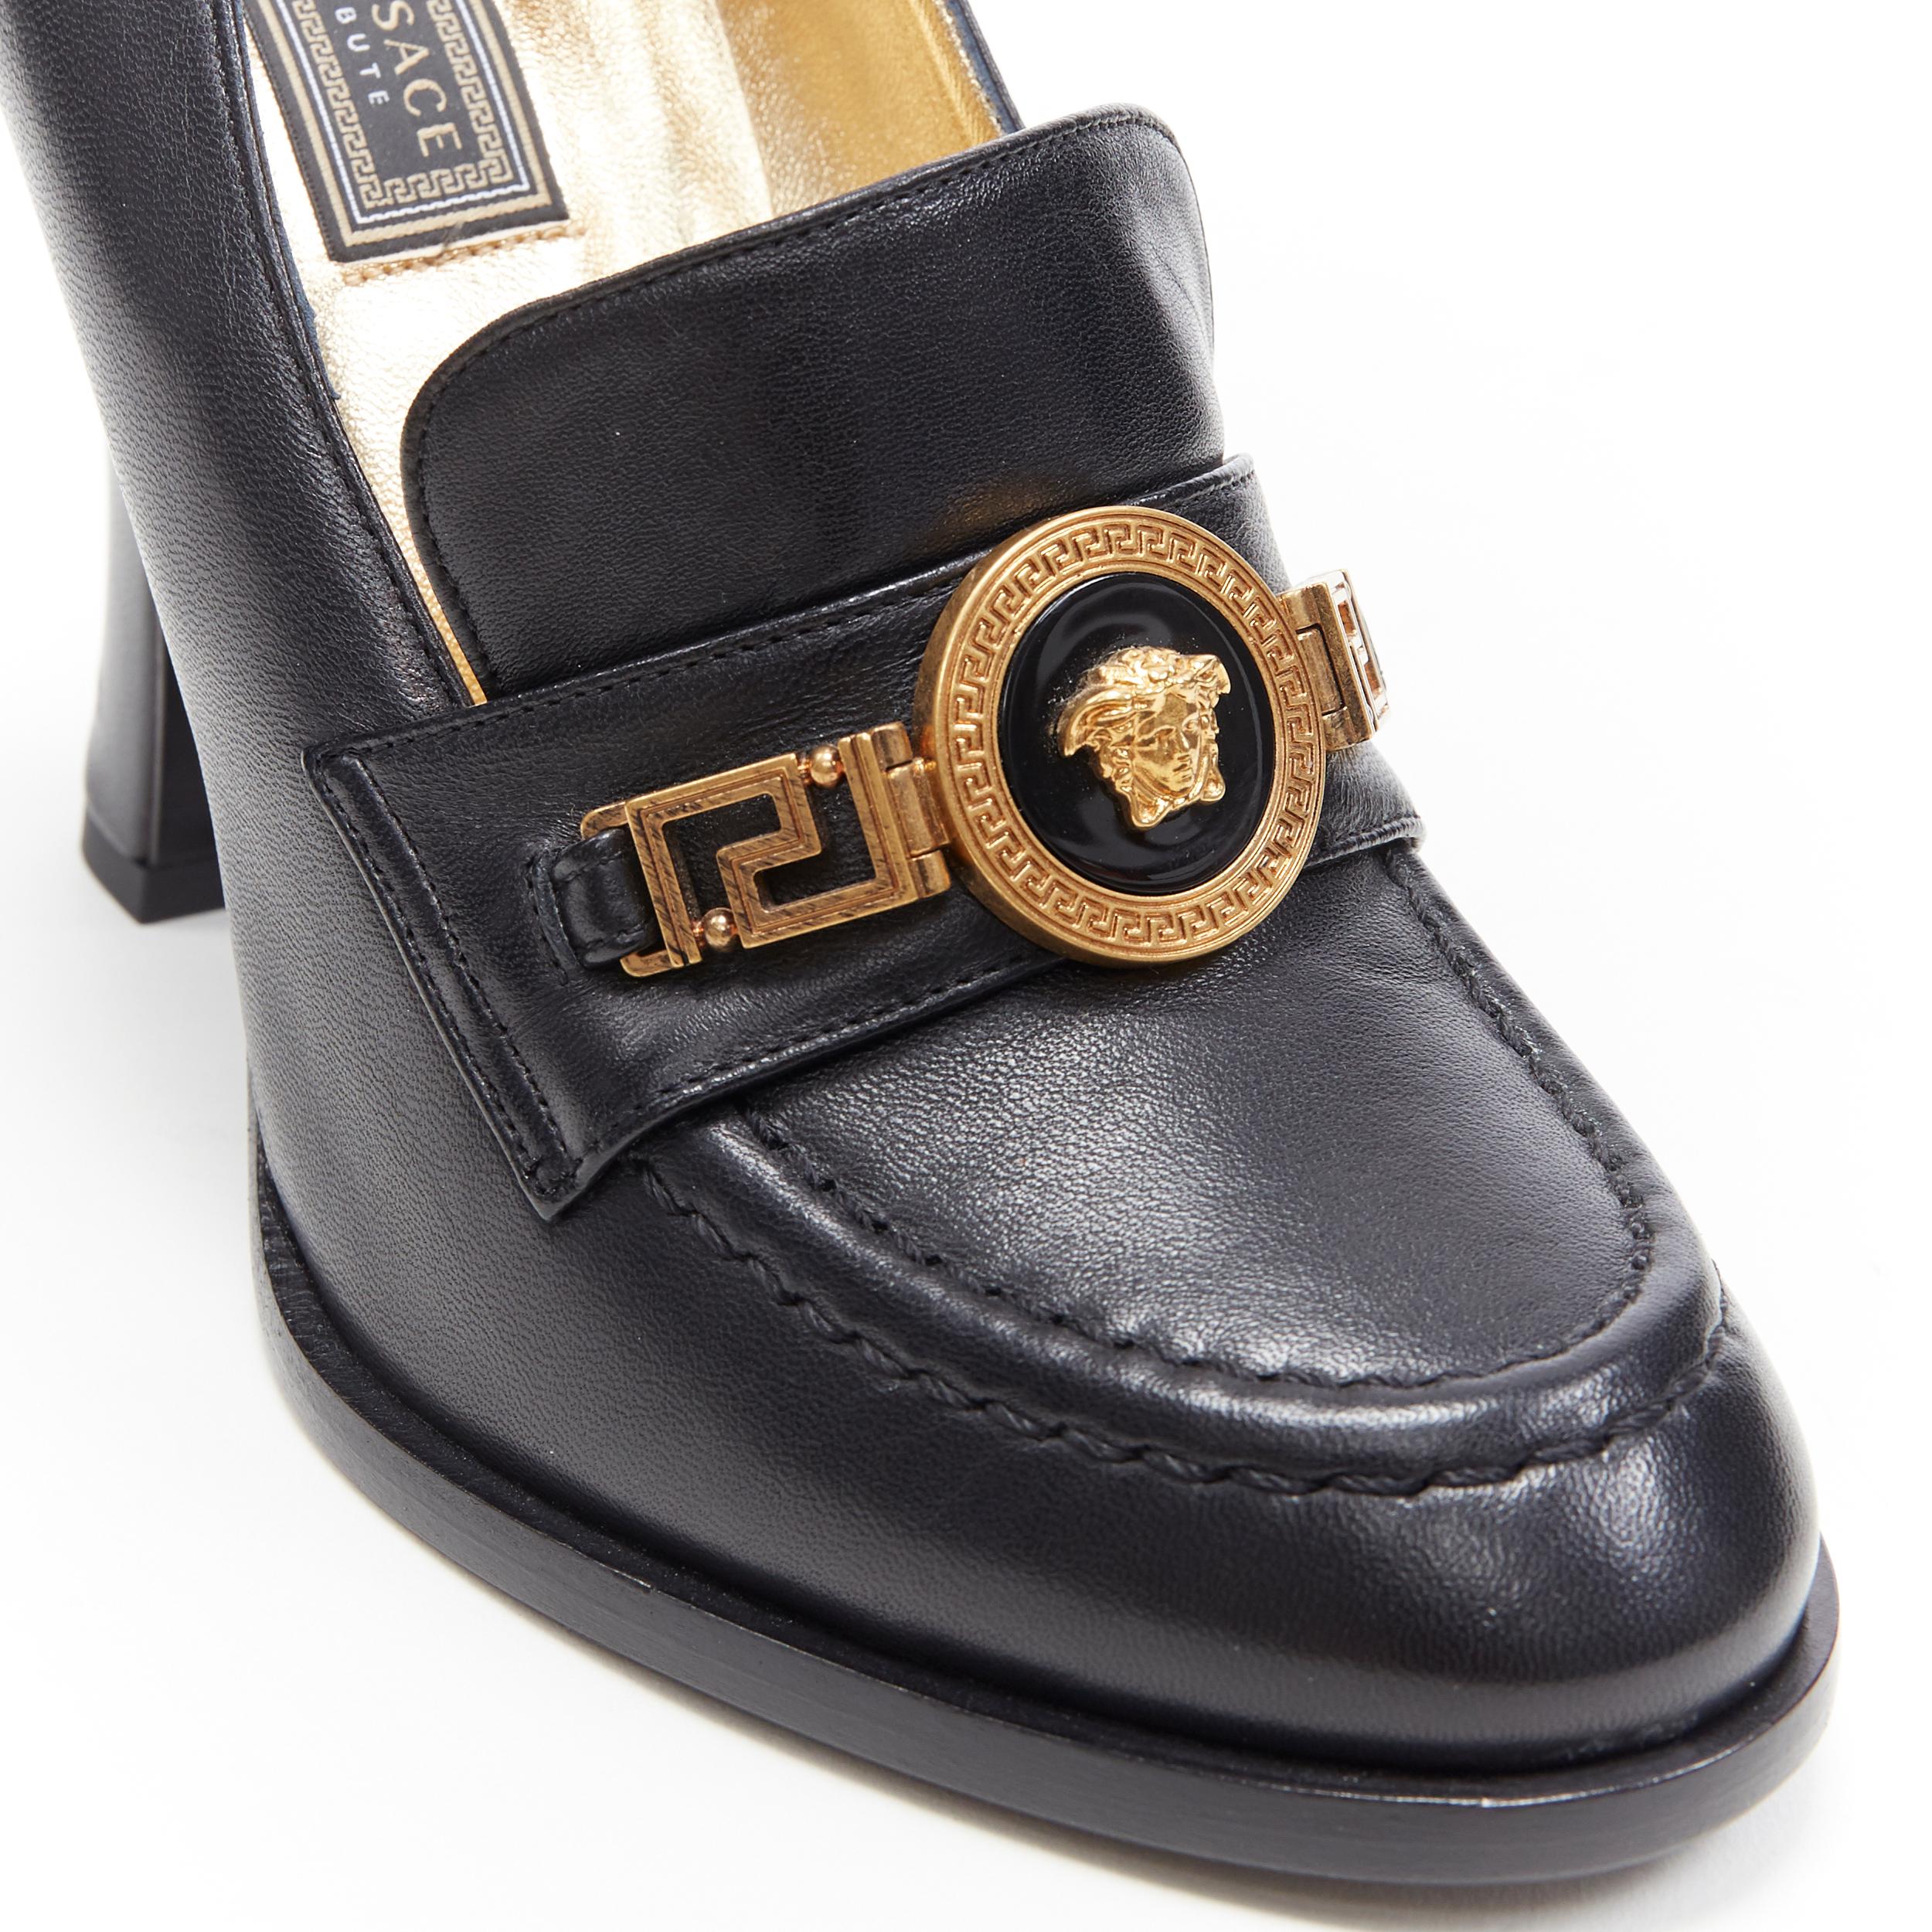 new VERSACE SS18 black leather Medusa chain charm chunky high heel loafer EU36
Brand: Versace
Designer: Donatella Versace
Collection: Spring Summer 2018
Model Name / Style: Heeled loafer
Material: Leather
Color: Black
Pattern: Solid
Lining material: